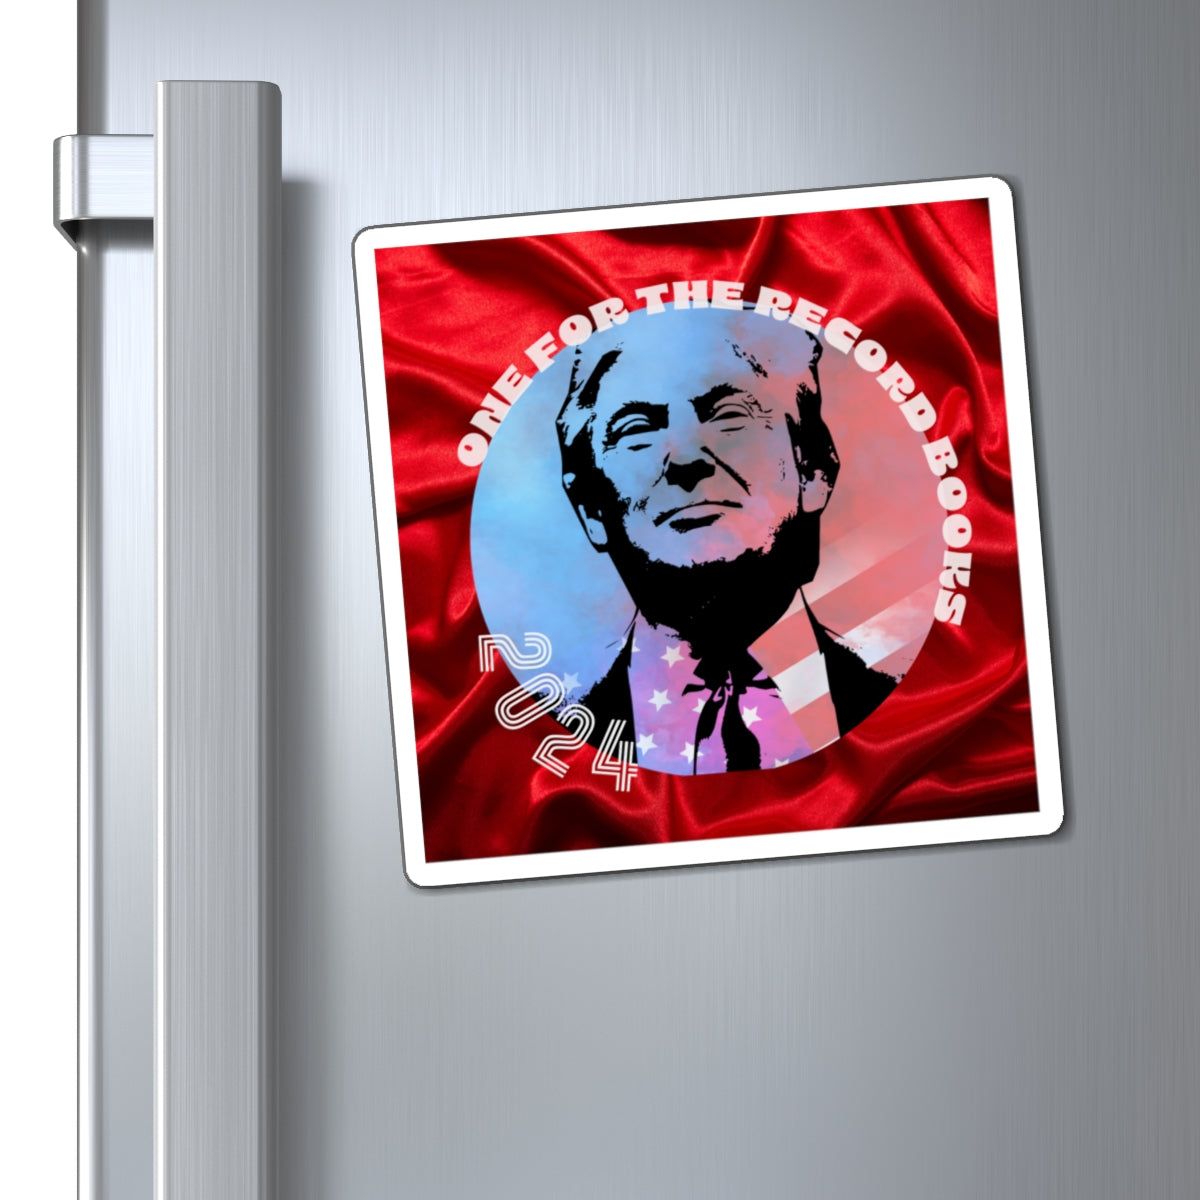 Shop our custom Trump magnets: Buy our Trump 2024 magnets: - Iron Phoenix GHG